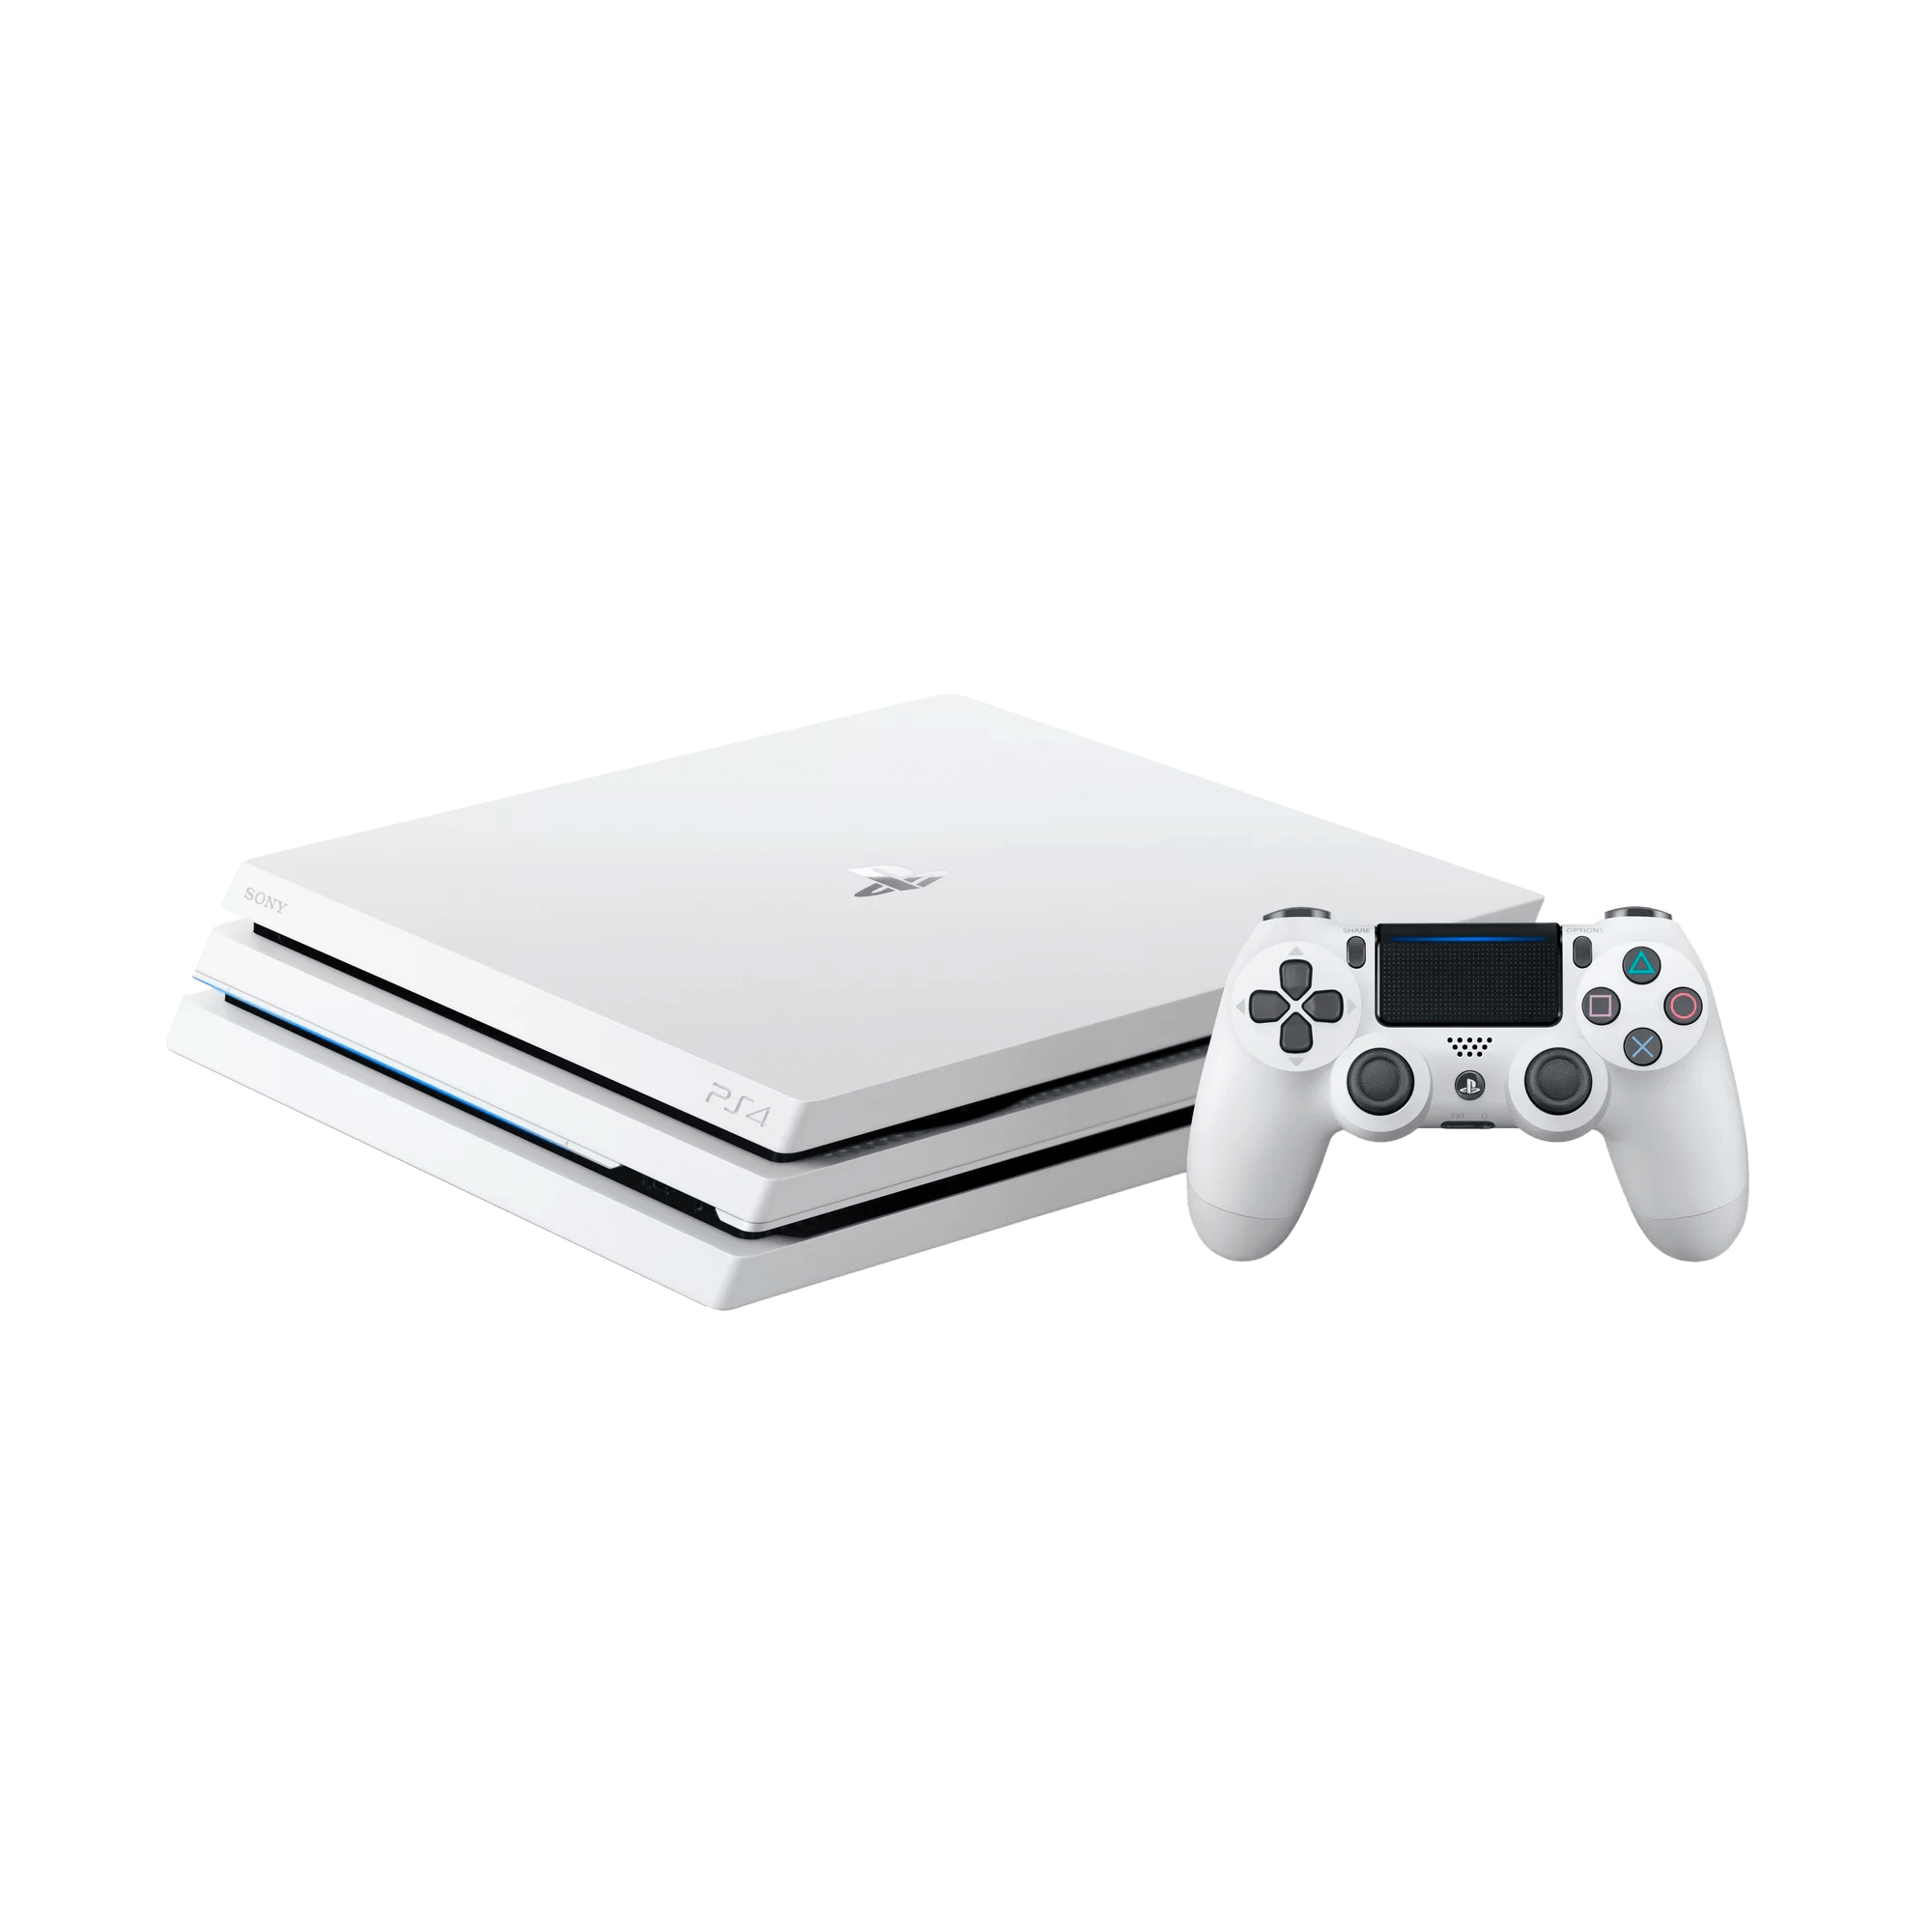 Sony PlayStation 4 Pro 1TB White (PS4) - Refurbished Good